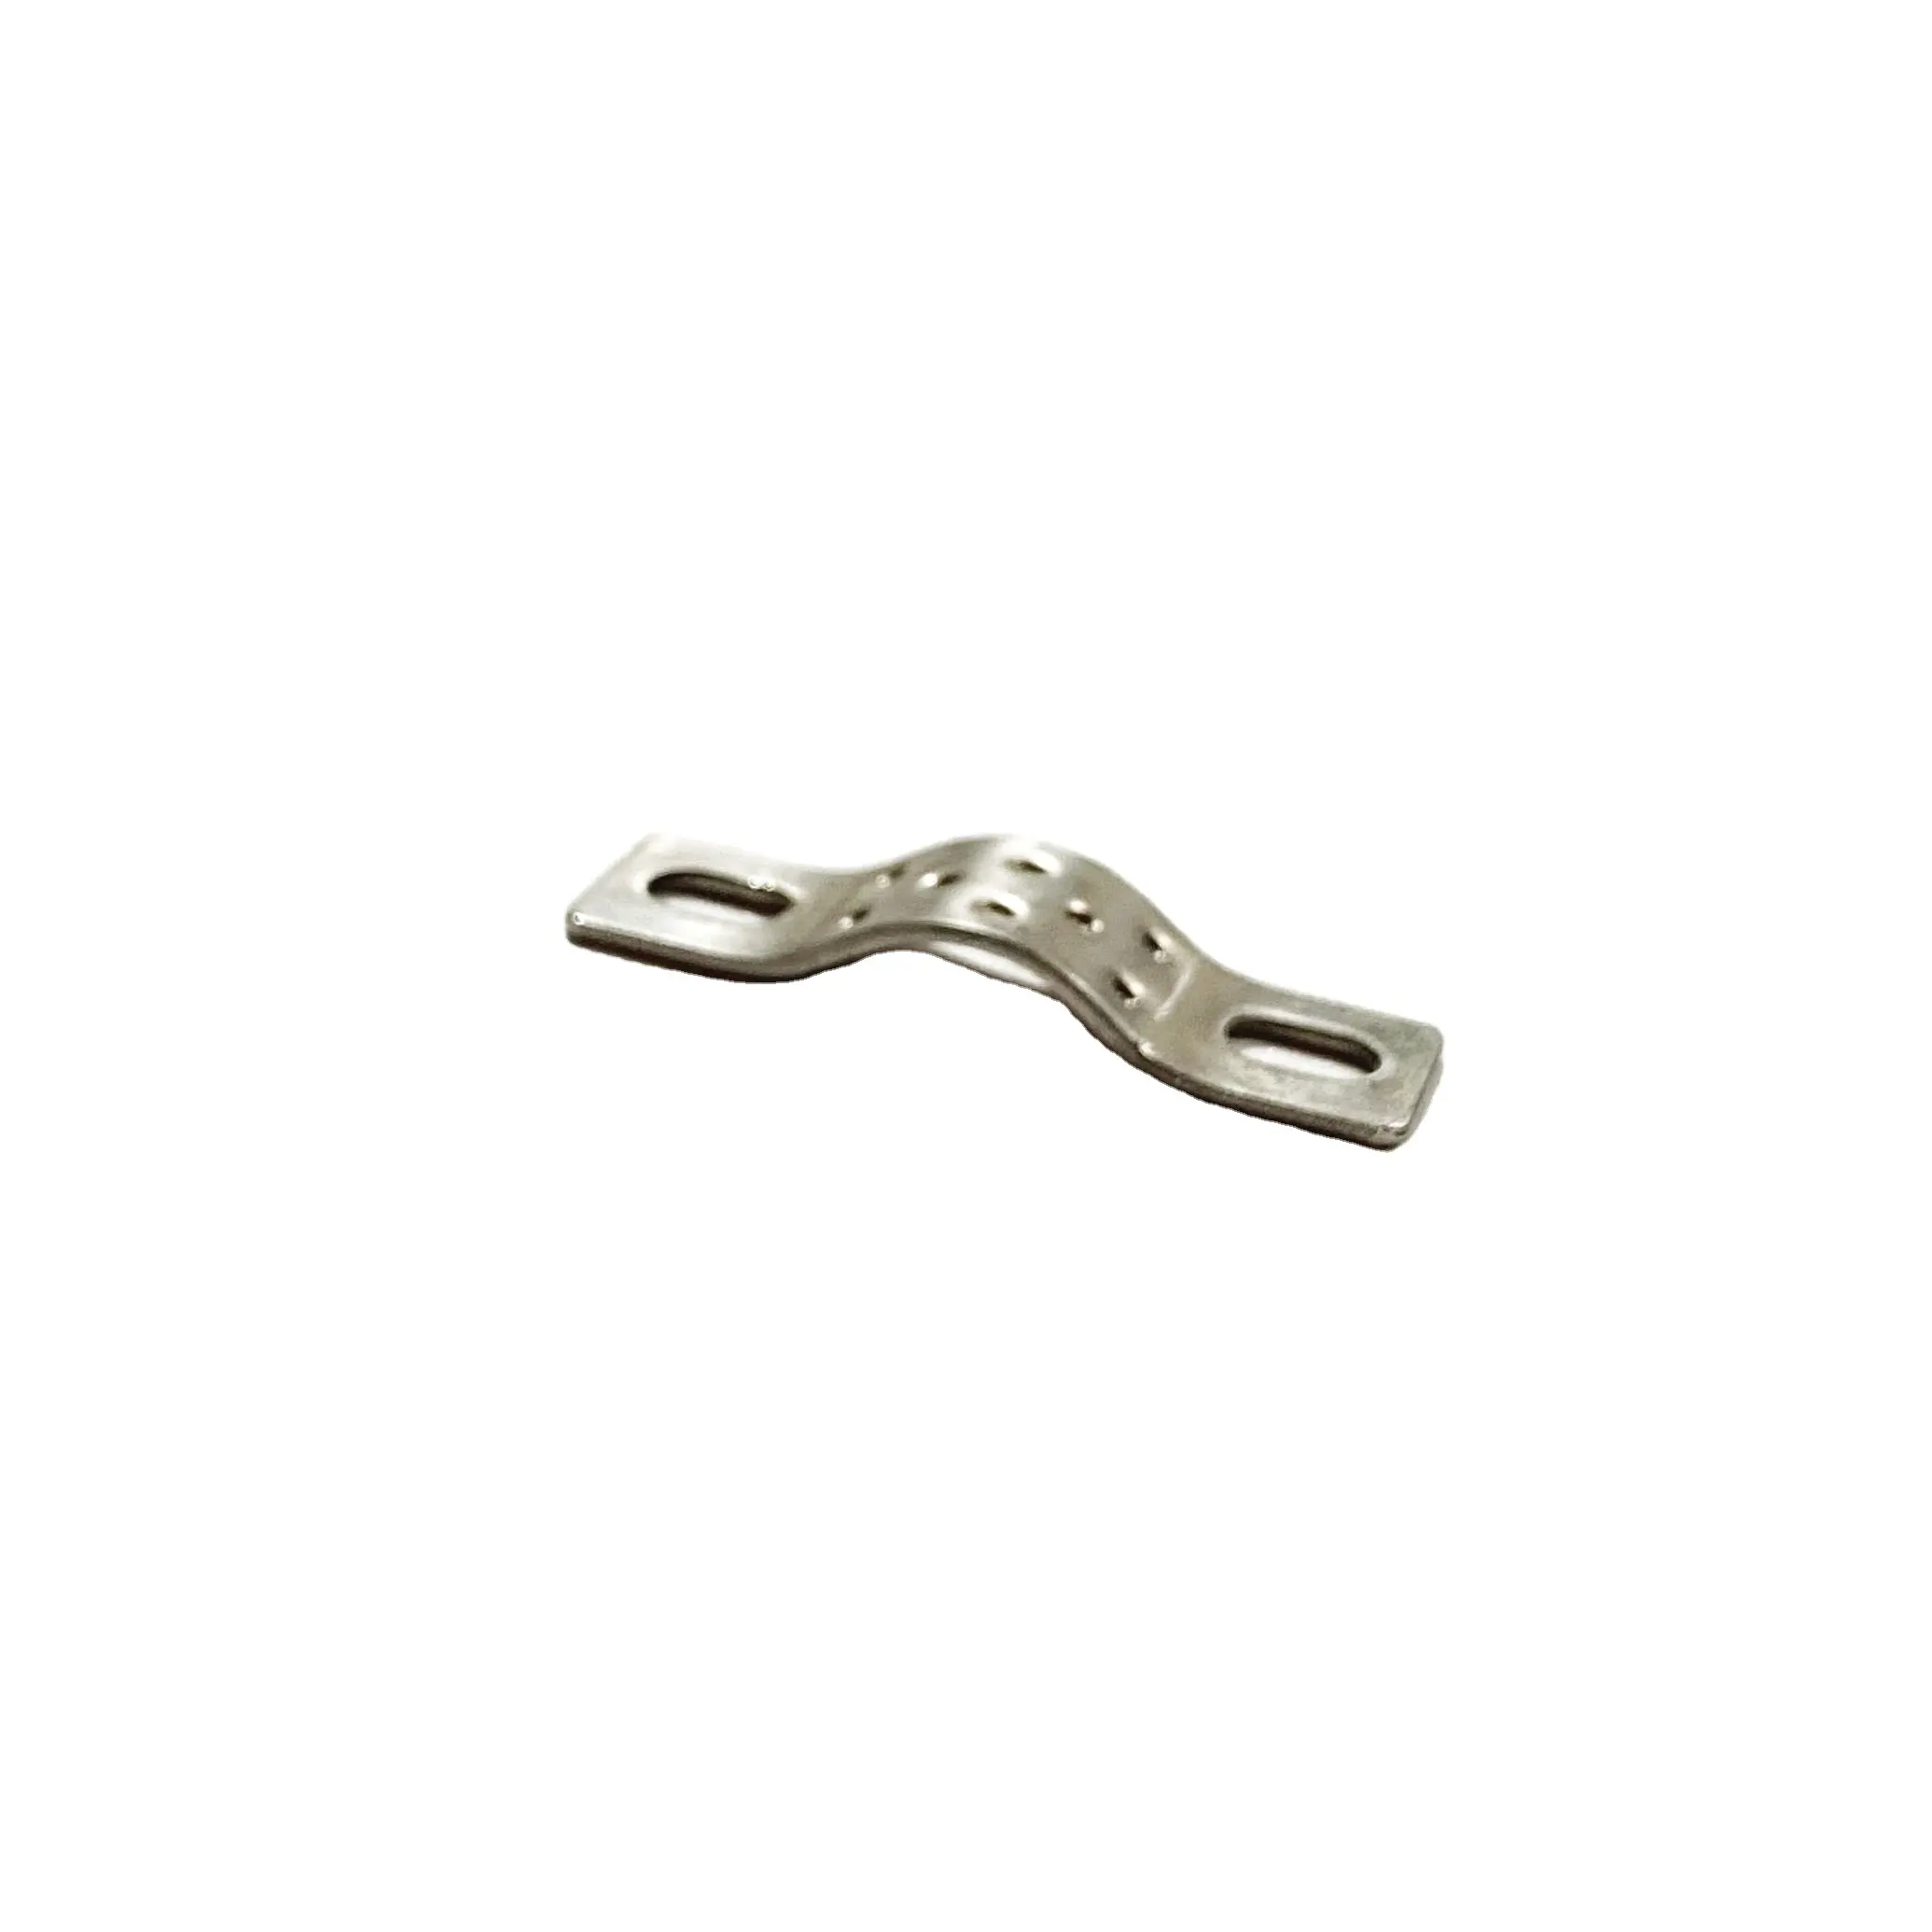 Custom Stainless Steel Clamp U-Type Saddle Clamp For Cable/Pipe/Hose Fixing